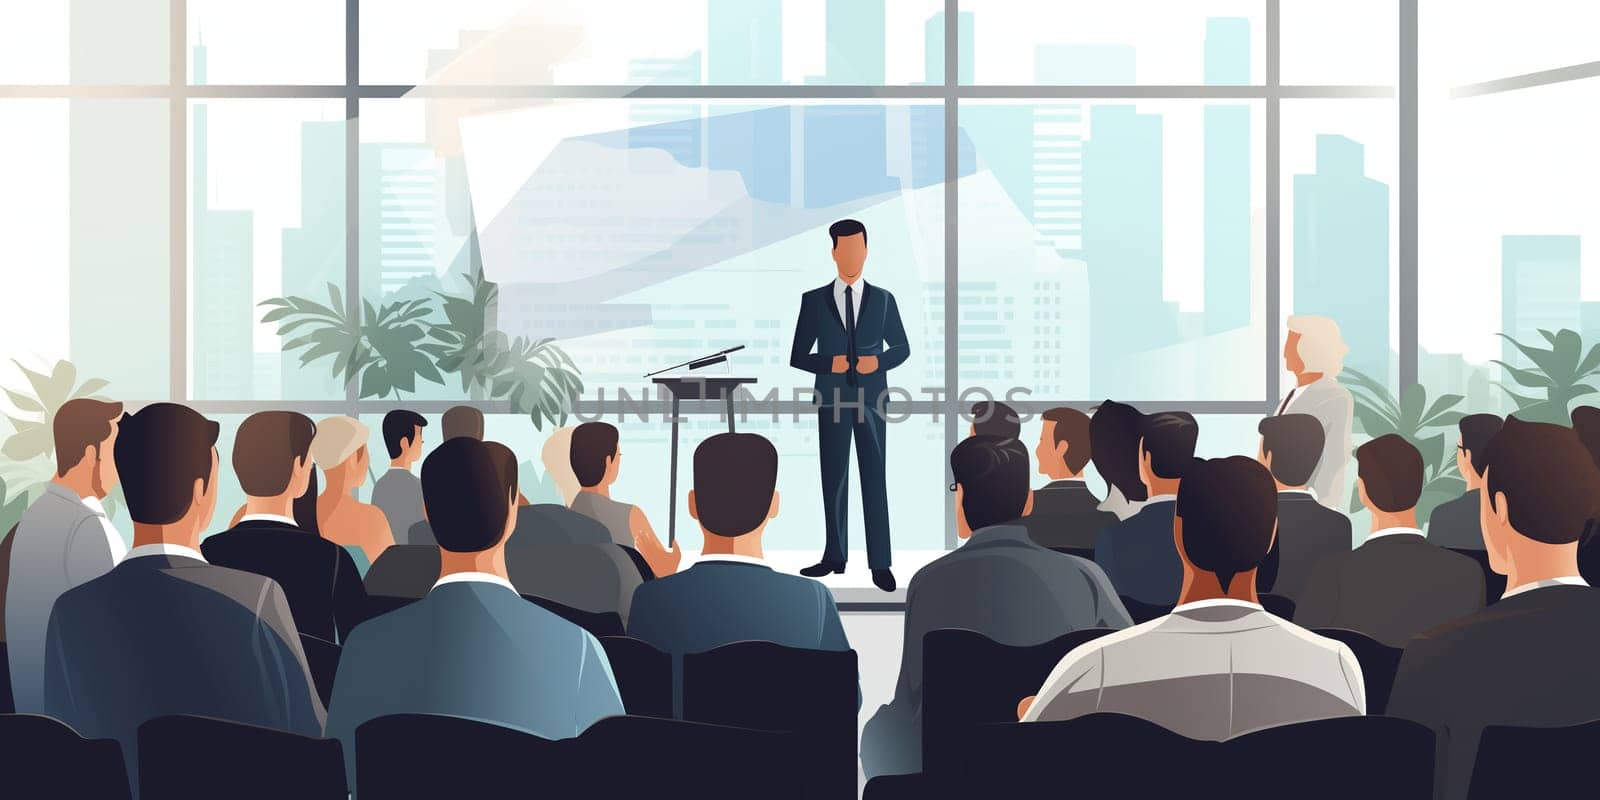 Group of business people at a seminar, official meeting, people in business formal clothes listening to a speech